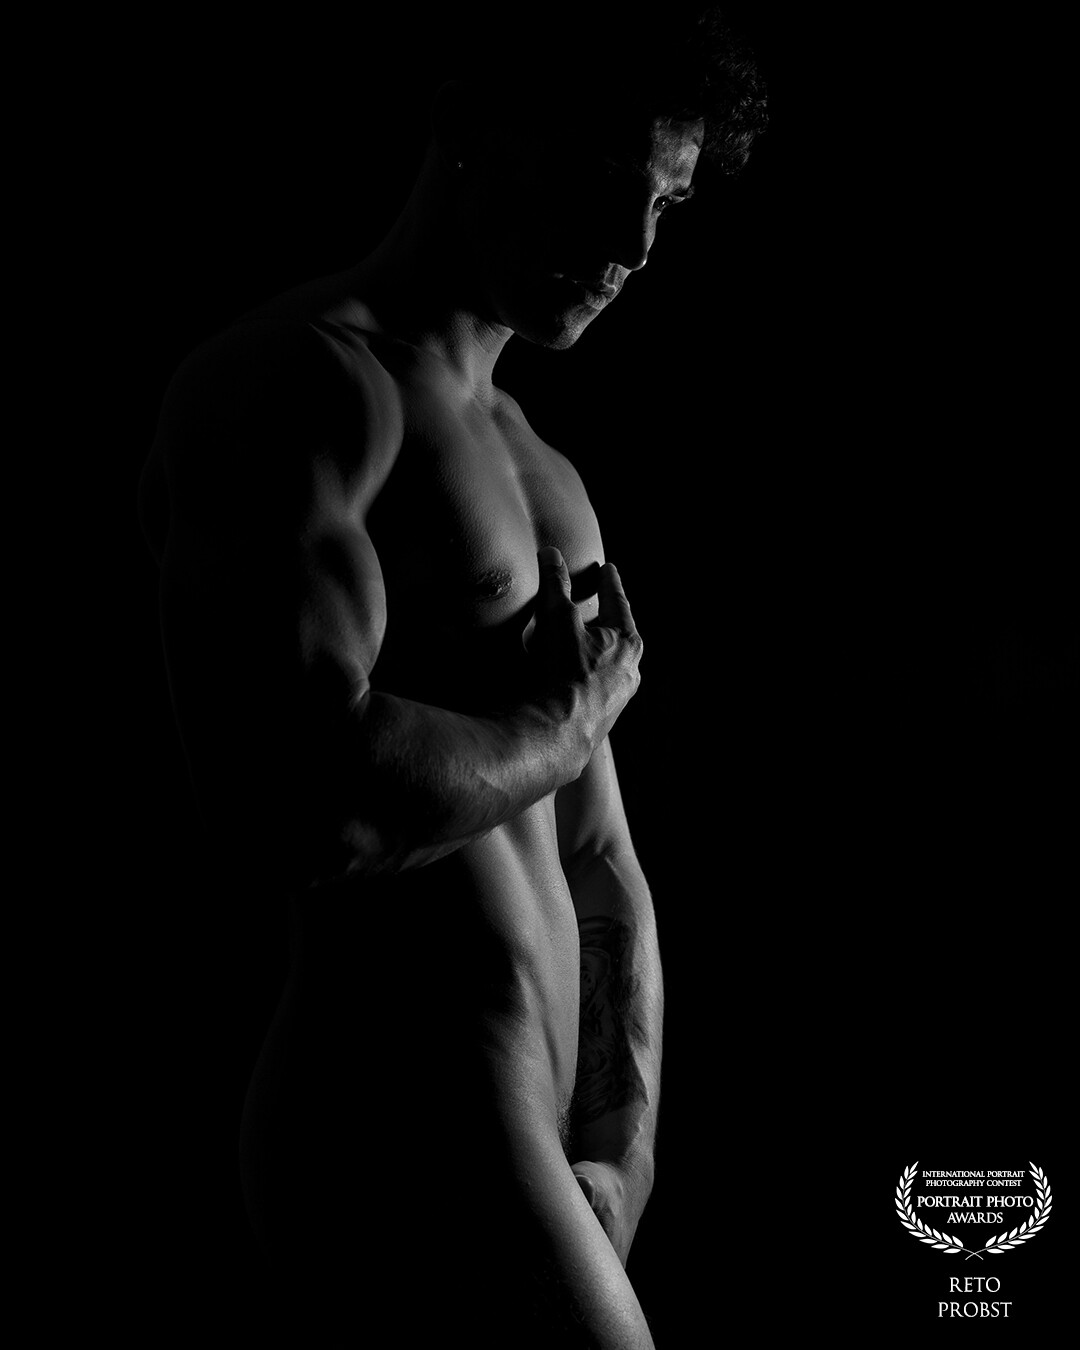 In this high-contrast black and white image, light and darkness merge into a sensual composition. The person emerges from the shadows and casts mysterious silhouettes through the backlight.